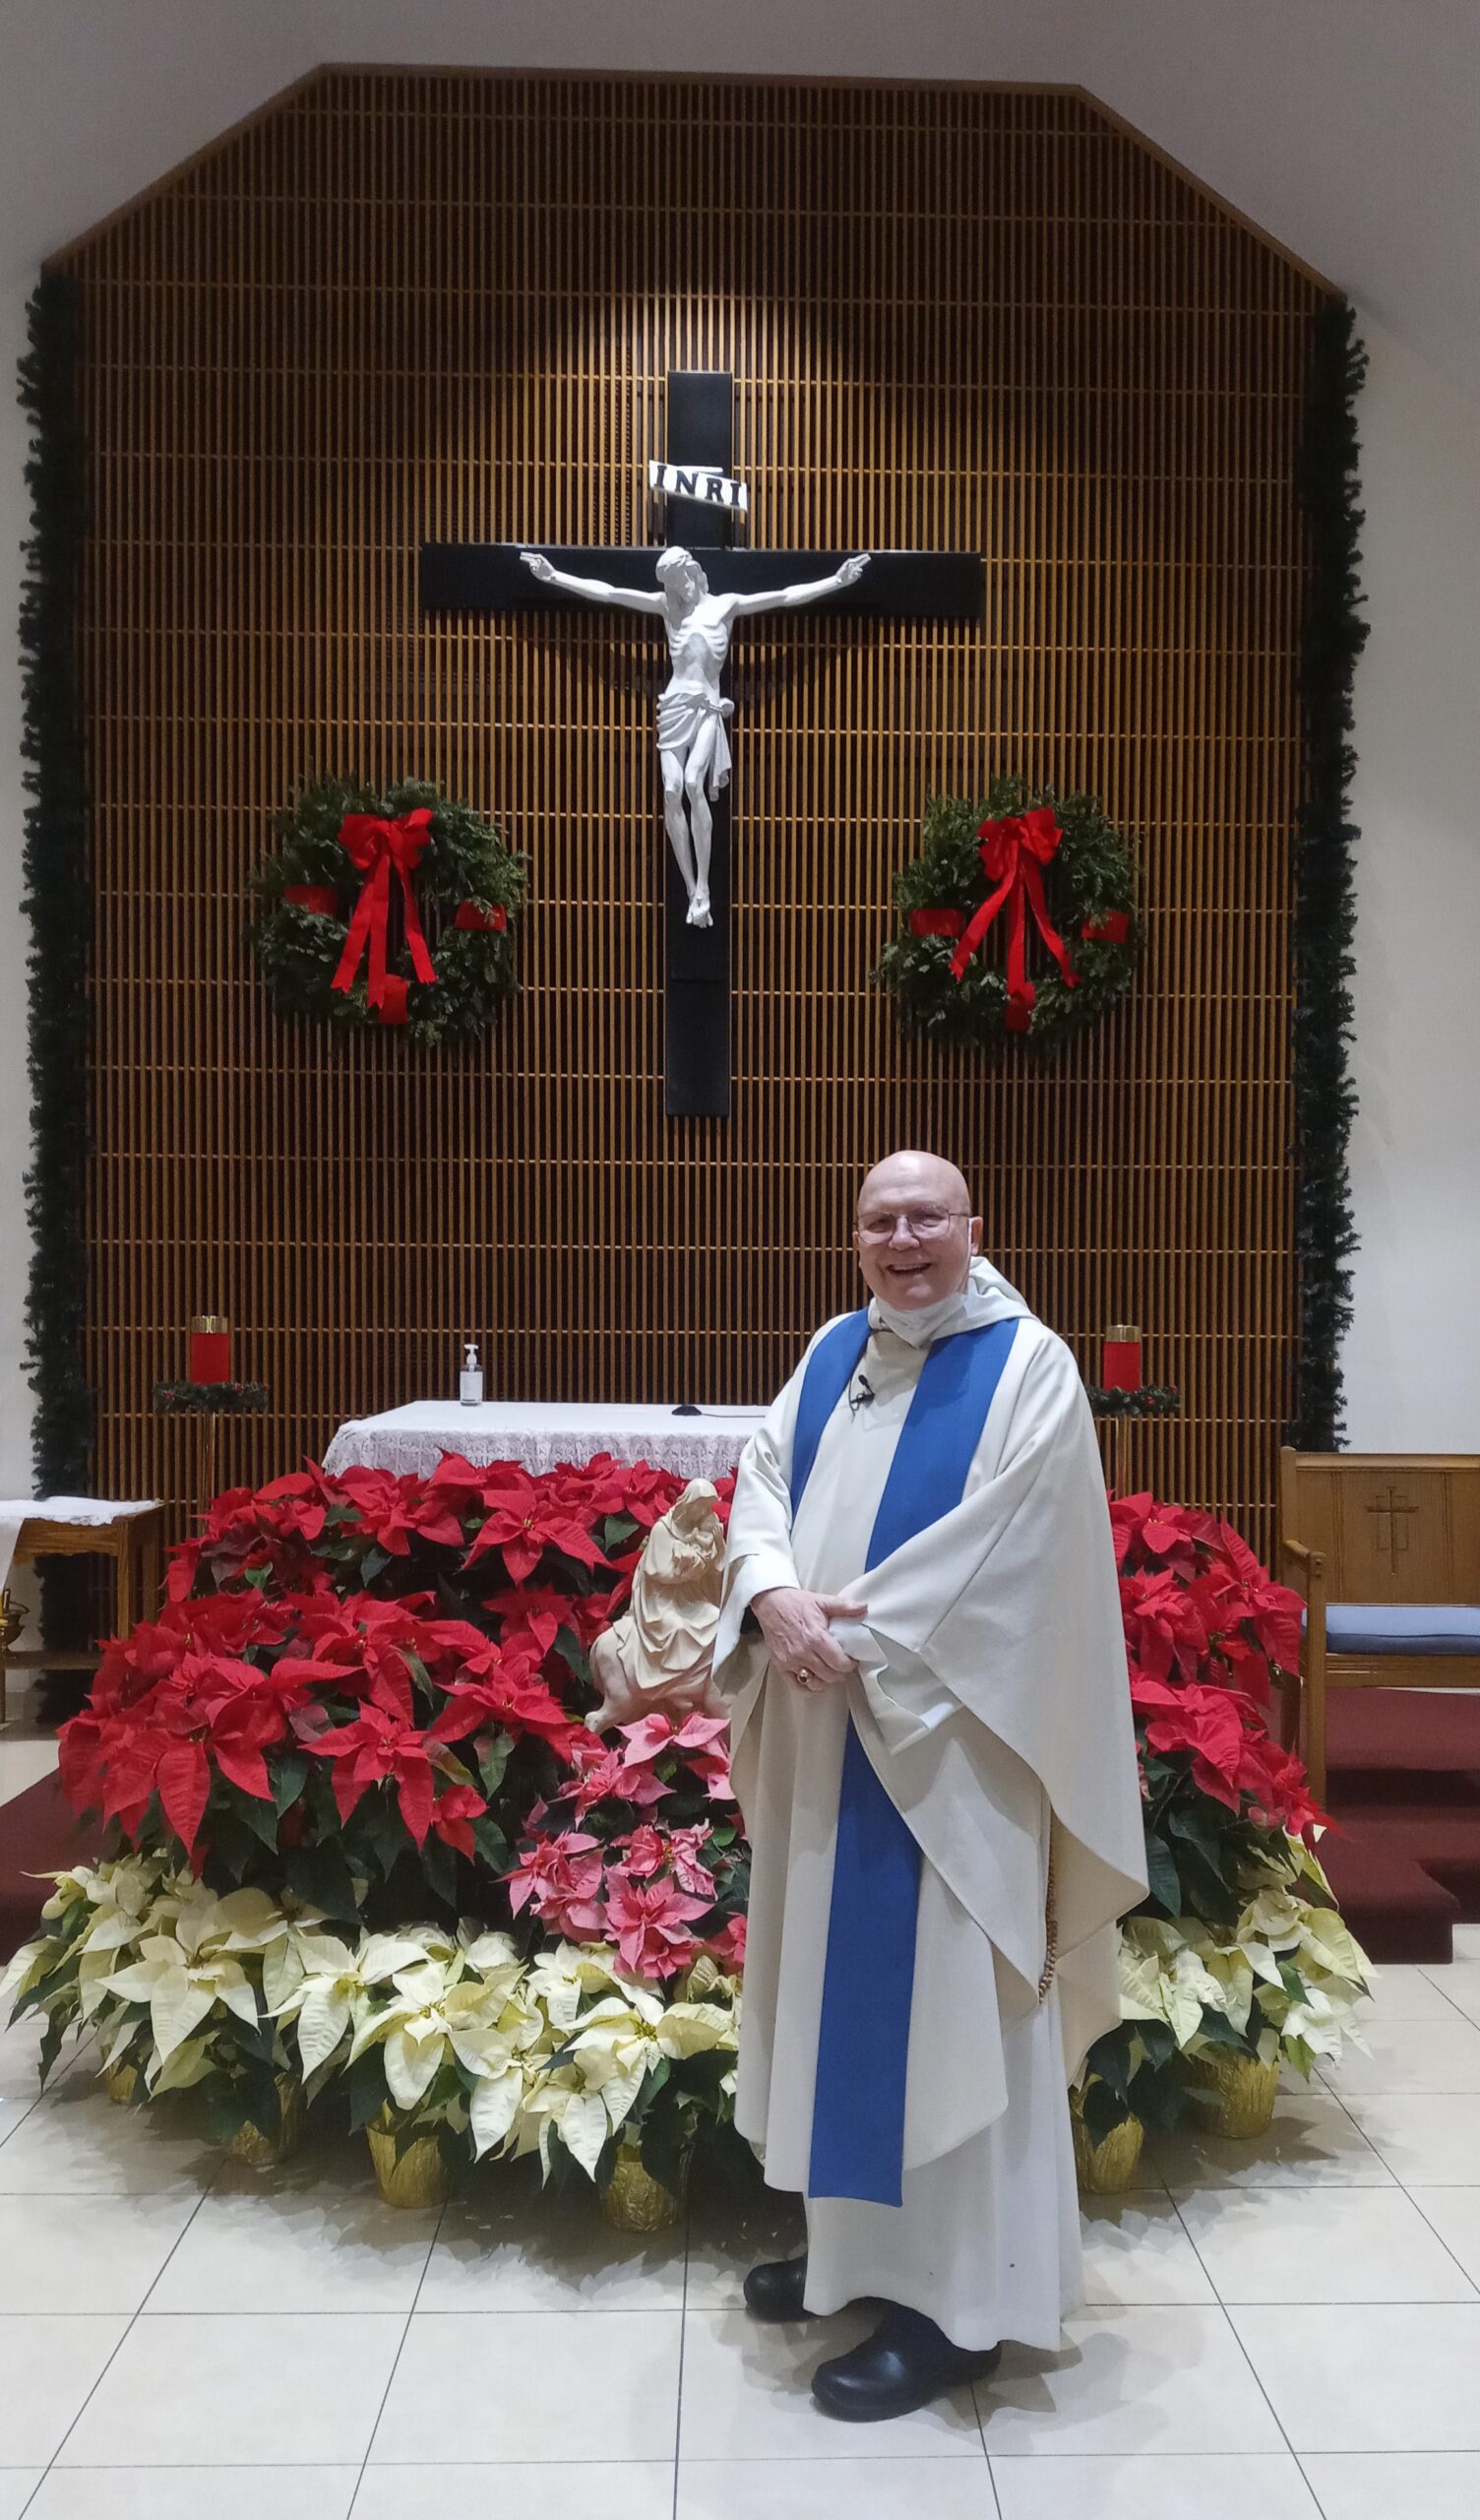 Father Hugh in front of Christmas Decorations